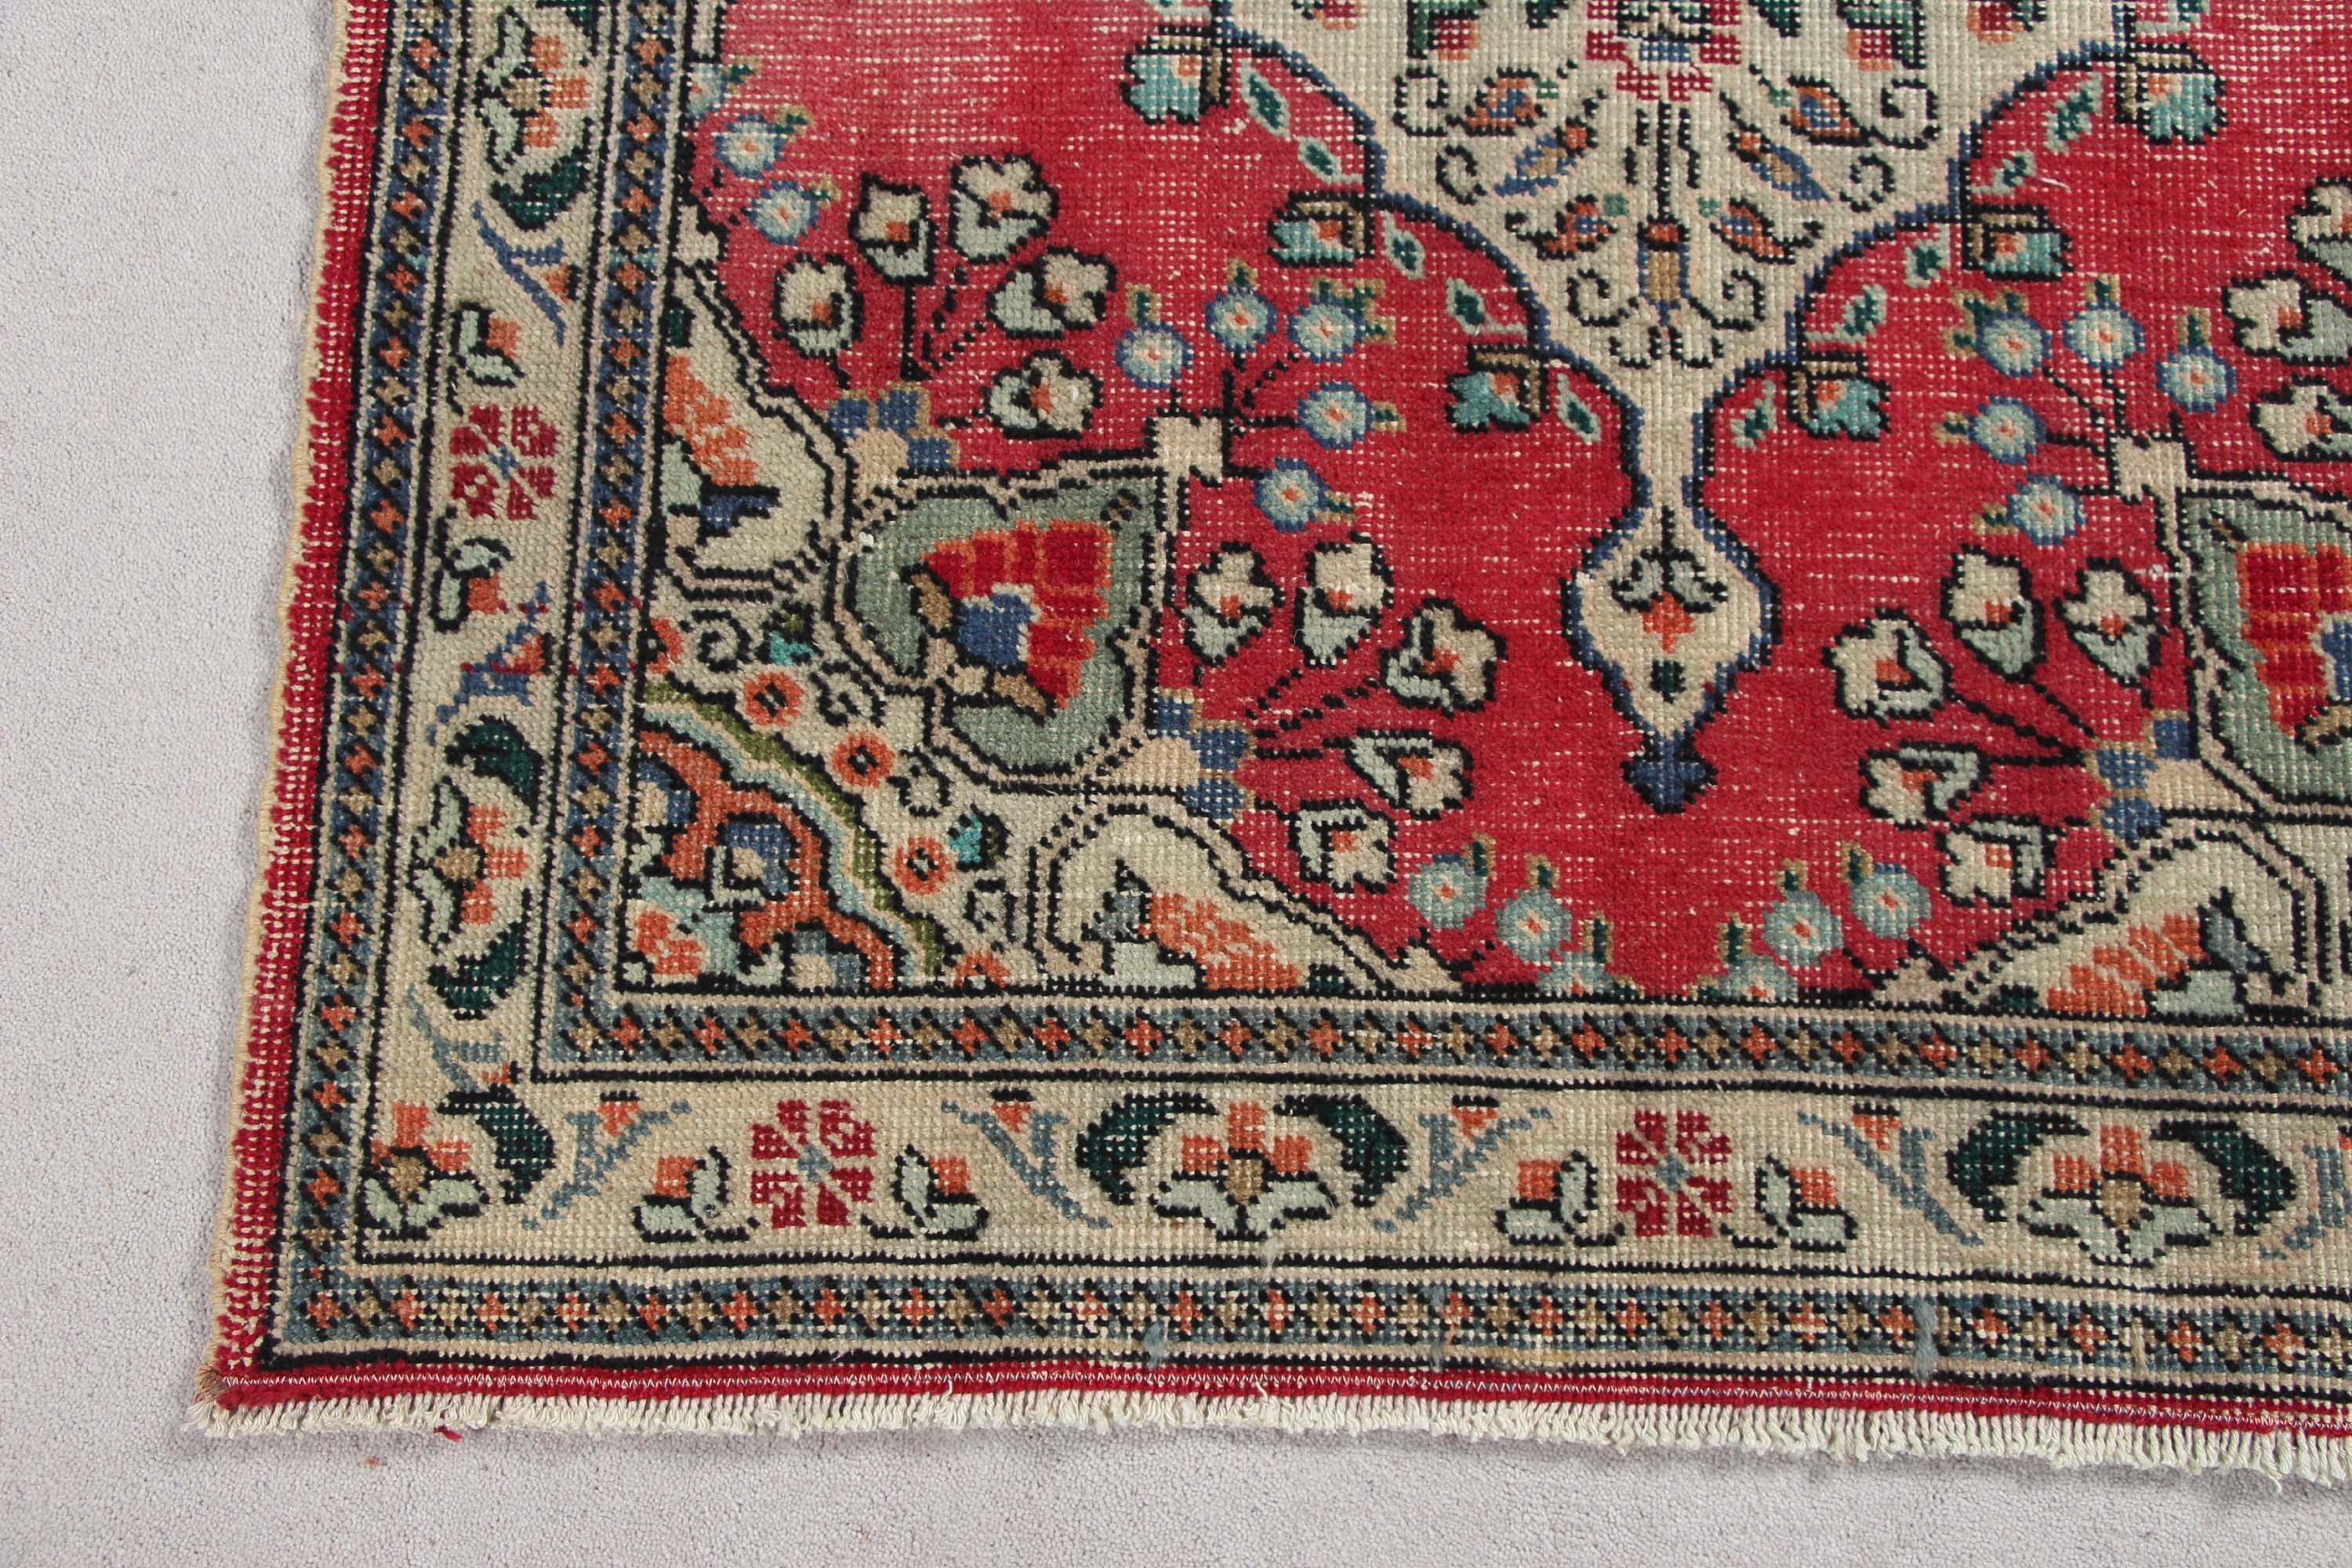 Floor Rug, 3.4x5 ft Accent Rug, Rugs for Kitchen, Red Oriental Rugs, Entry Rug, Turkish Rugs, Vintage Rug, Kitchen Rug, Bedroom Rugs